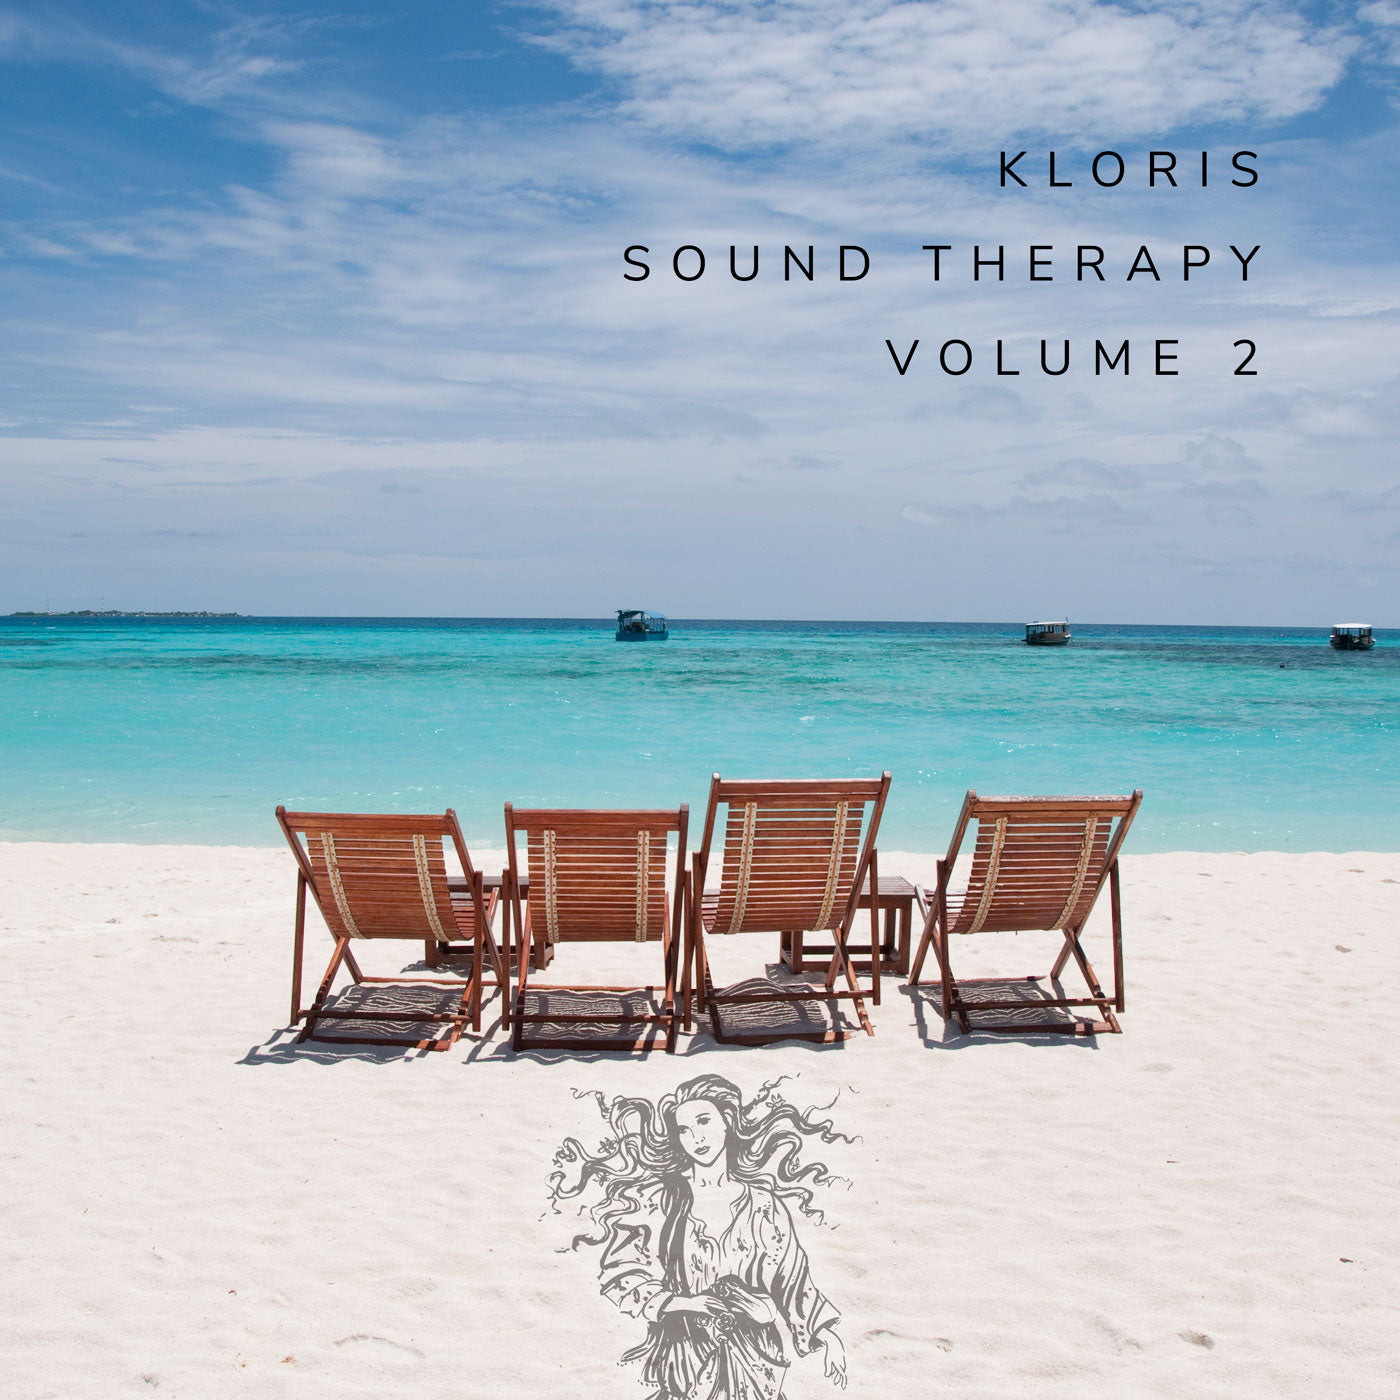 Down by the beach - sound therapy volume two